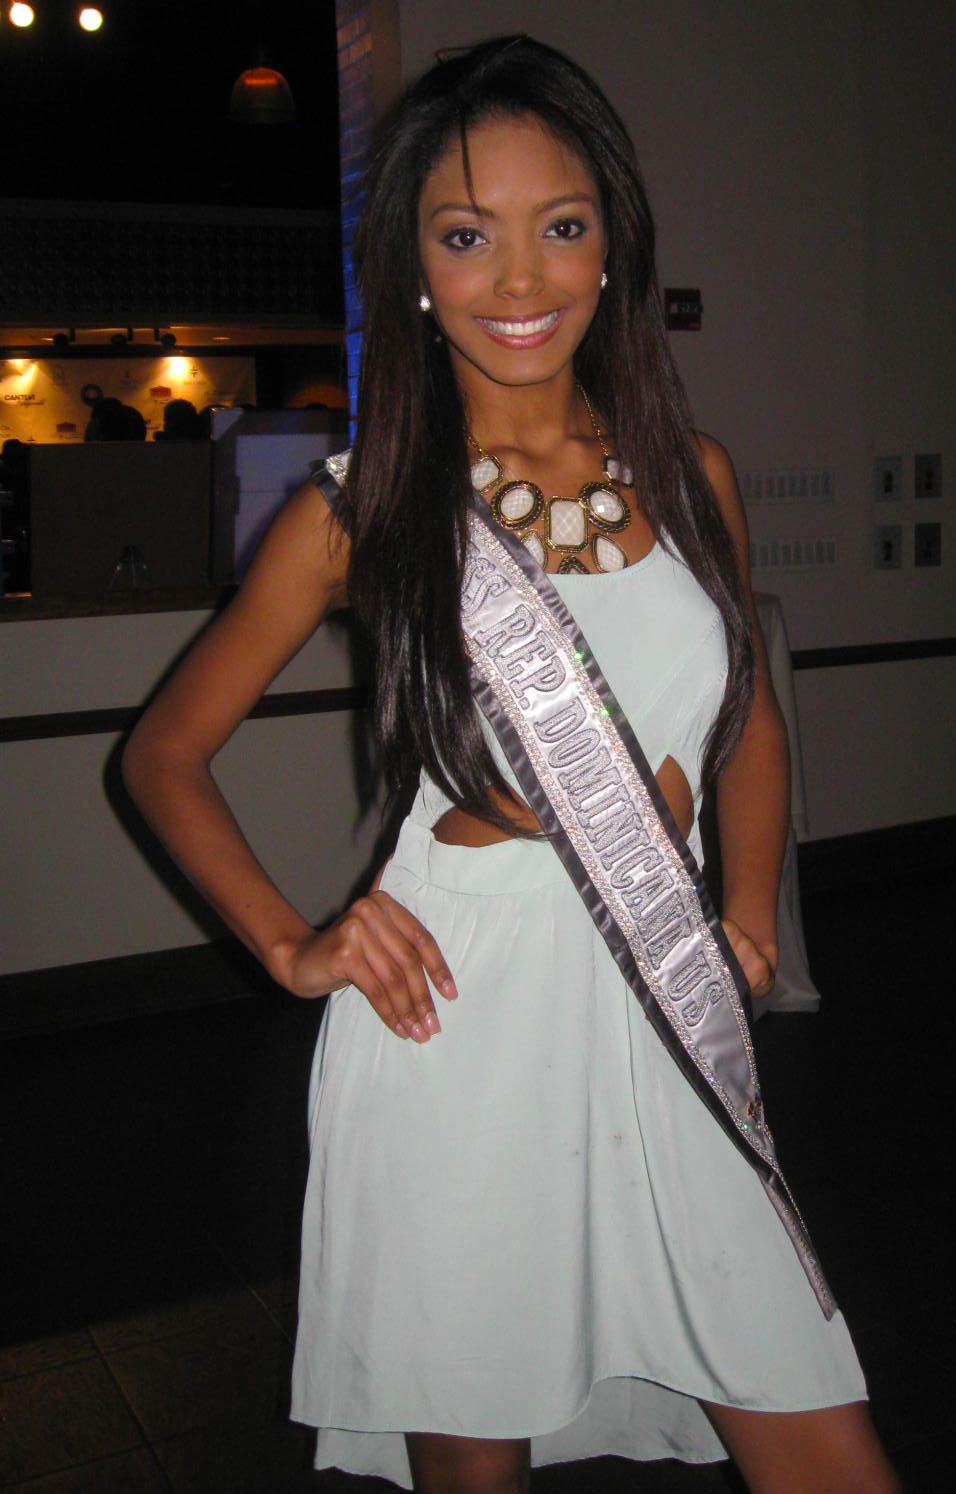 Ms. Dominican Republic US Chantel Martinez flashes that winning smile for The Ravi Report